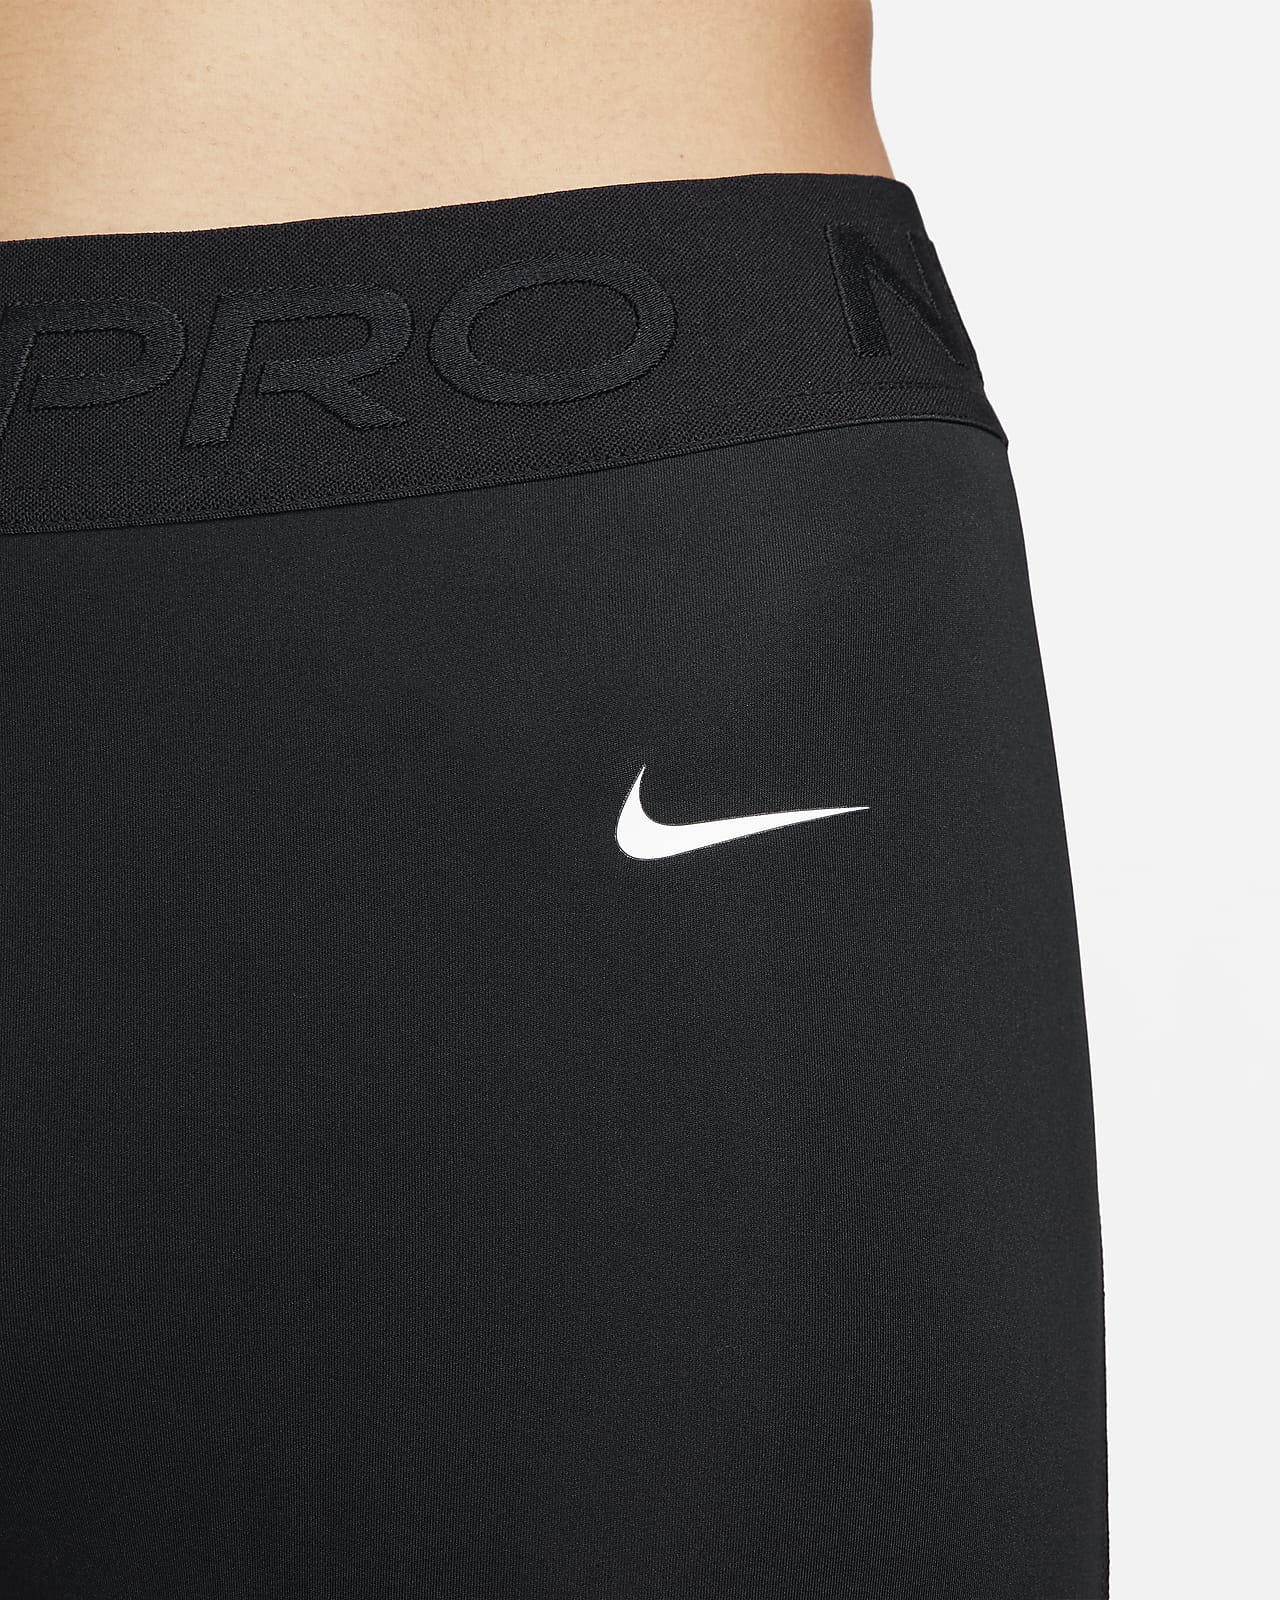 Nike Pro Women's High-Waisted Leggings with Pockets - Black